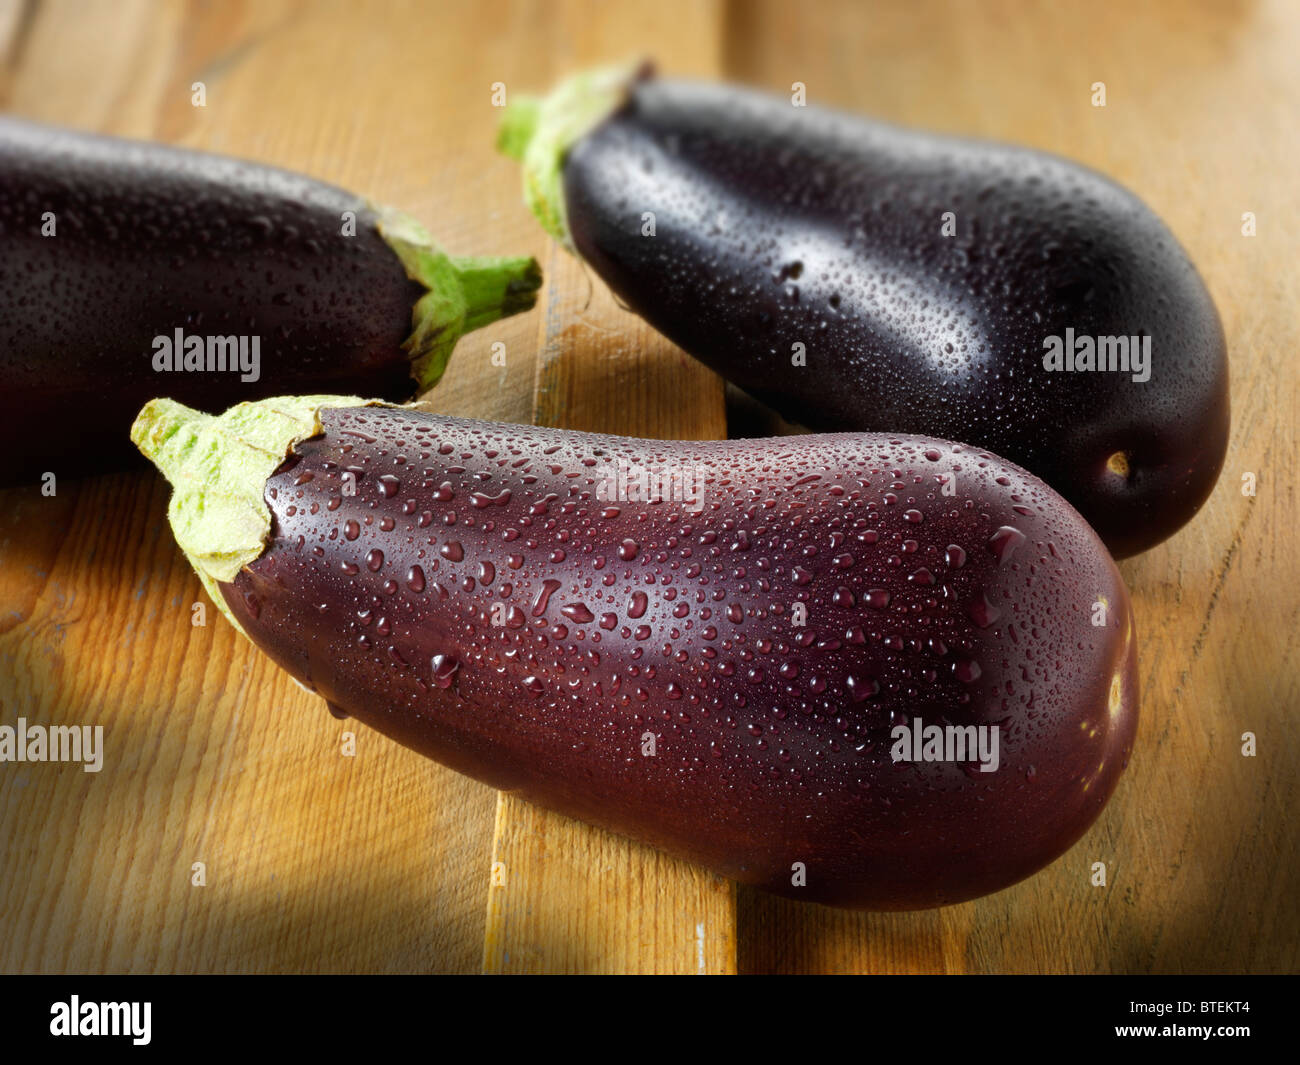 Fresh whole aubergines or eggplants with water droplets, uncut and un-cooked against a wood background Stock Photo